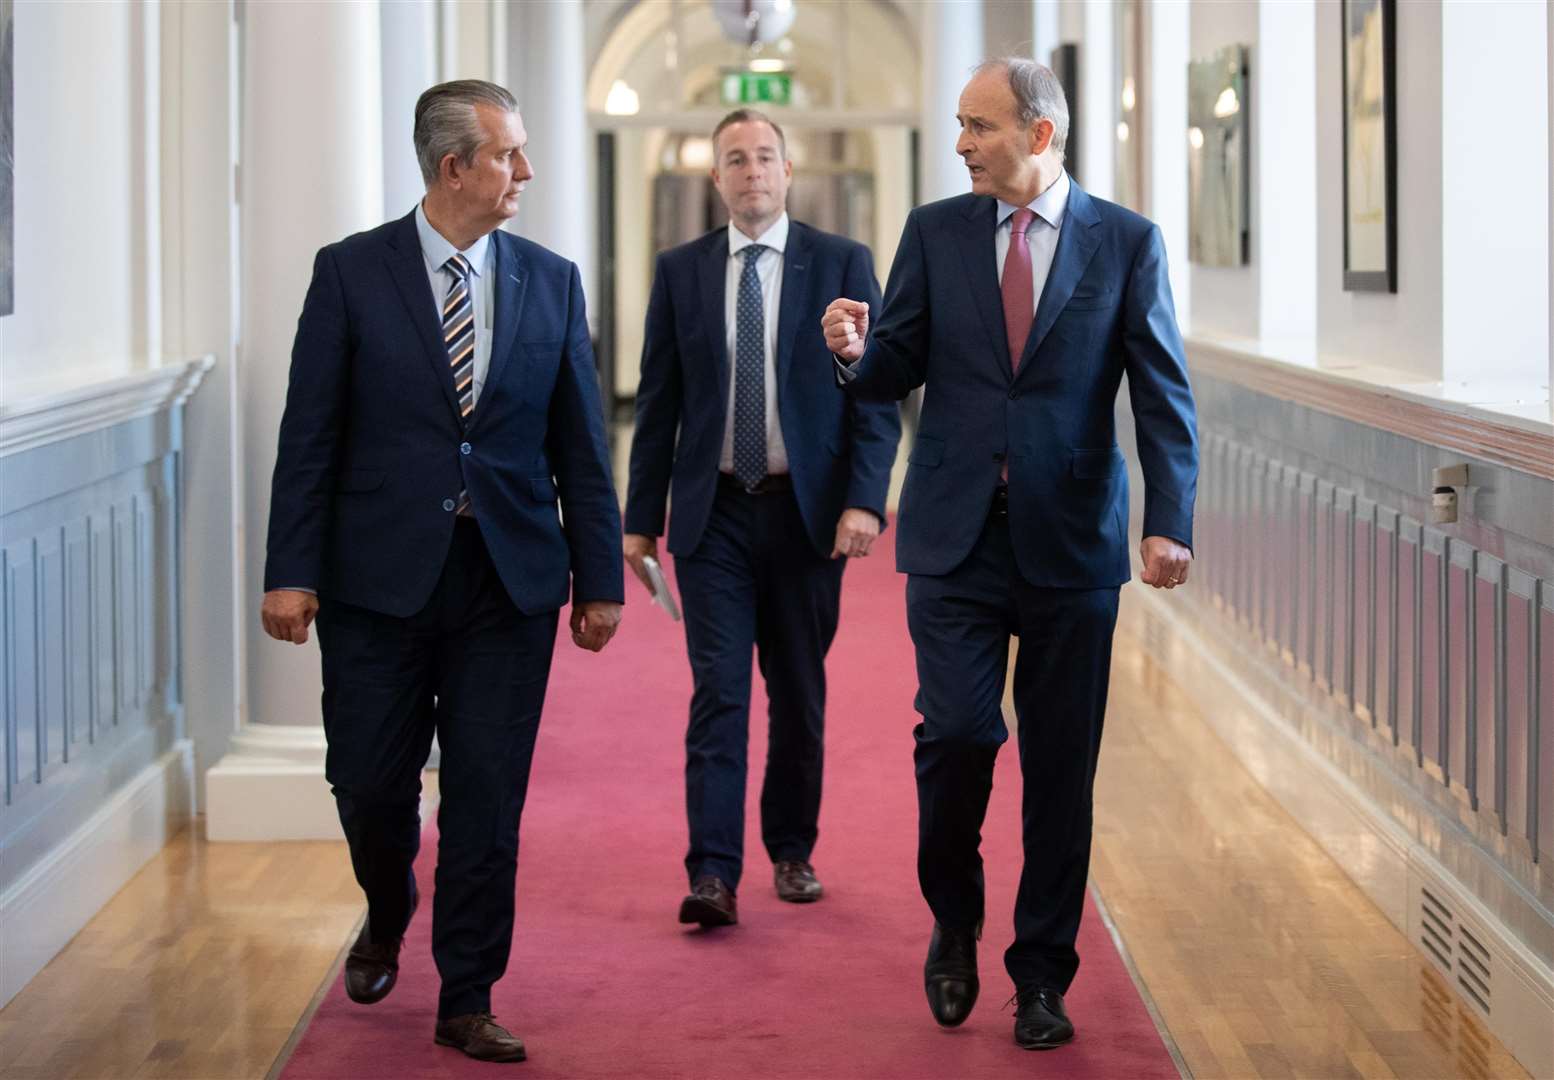 Mr Poots, left, held just one meeting with Taoiseach Micheal Martin, right, during his time as DUP leader (Julien Behal Photography/PA)